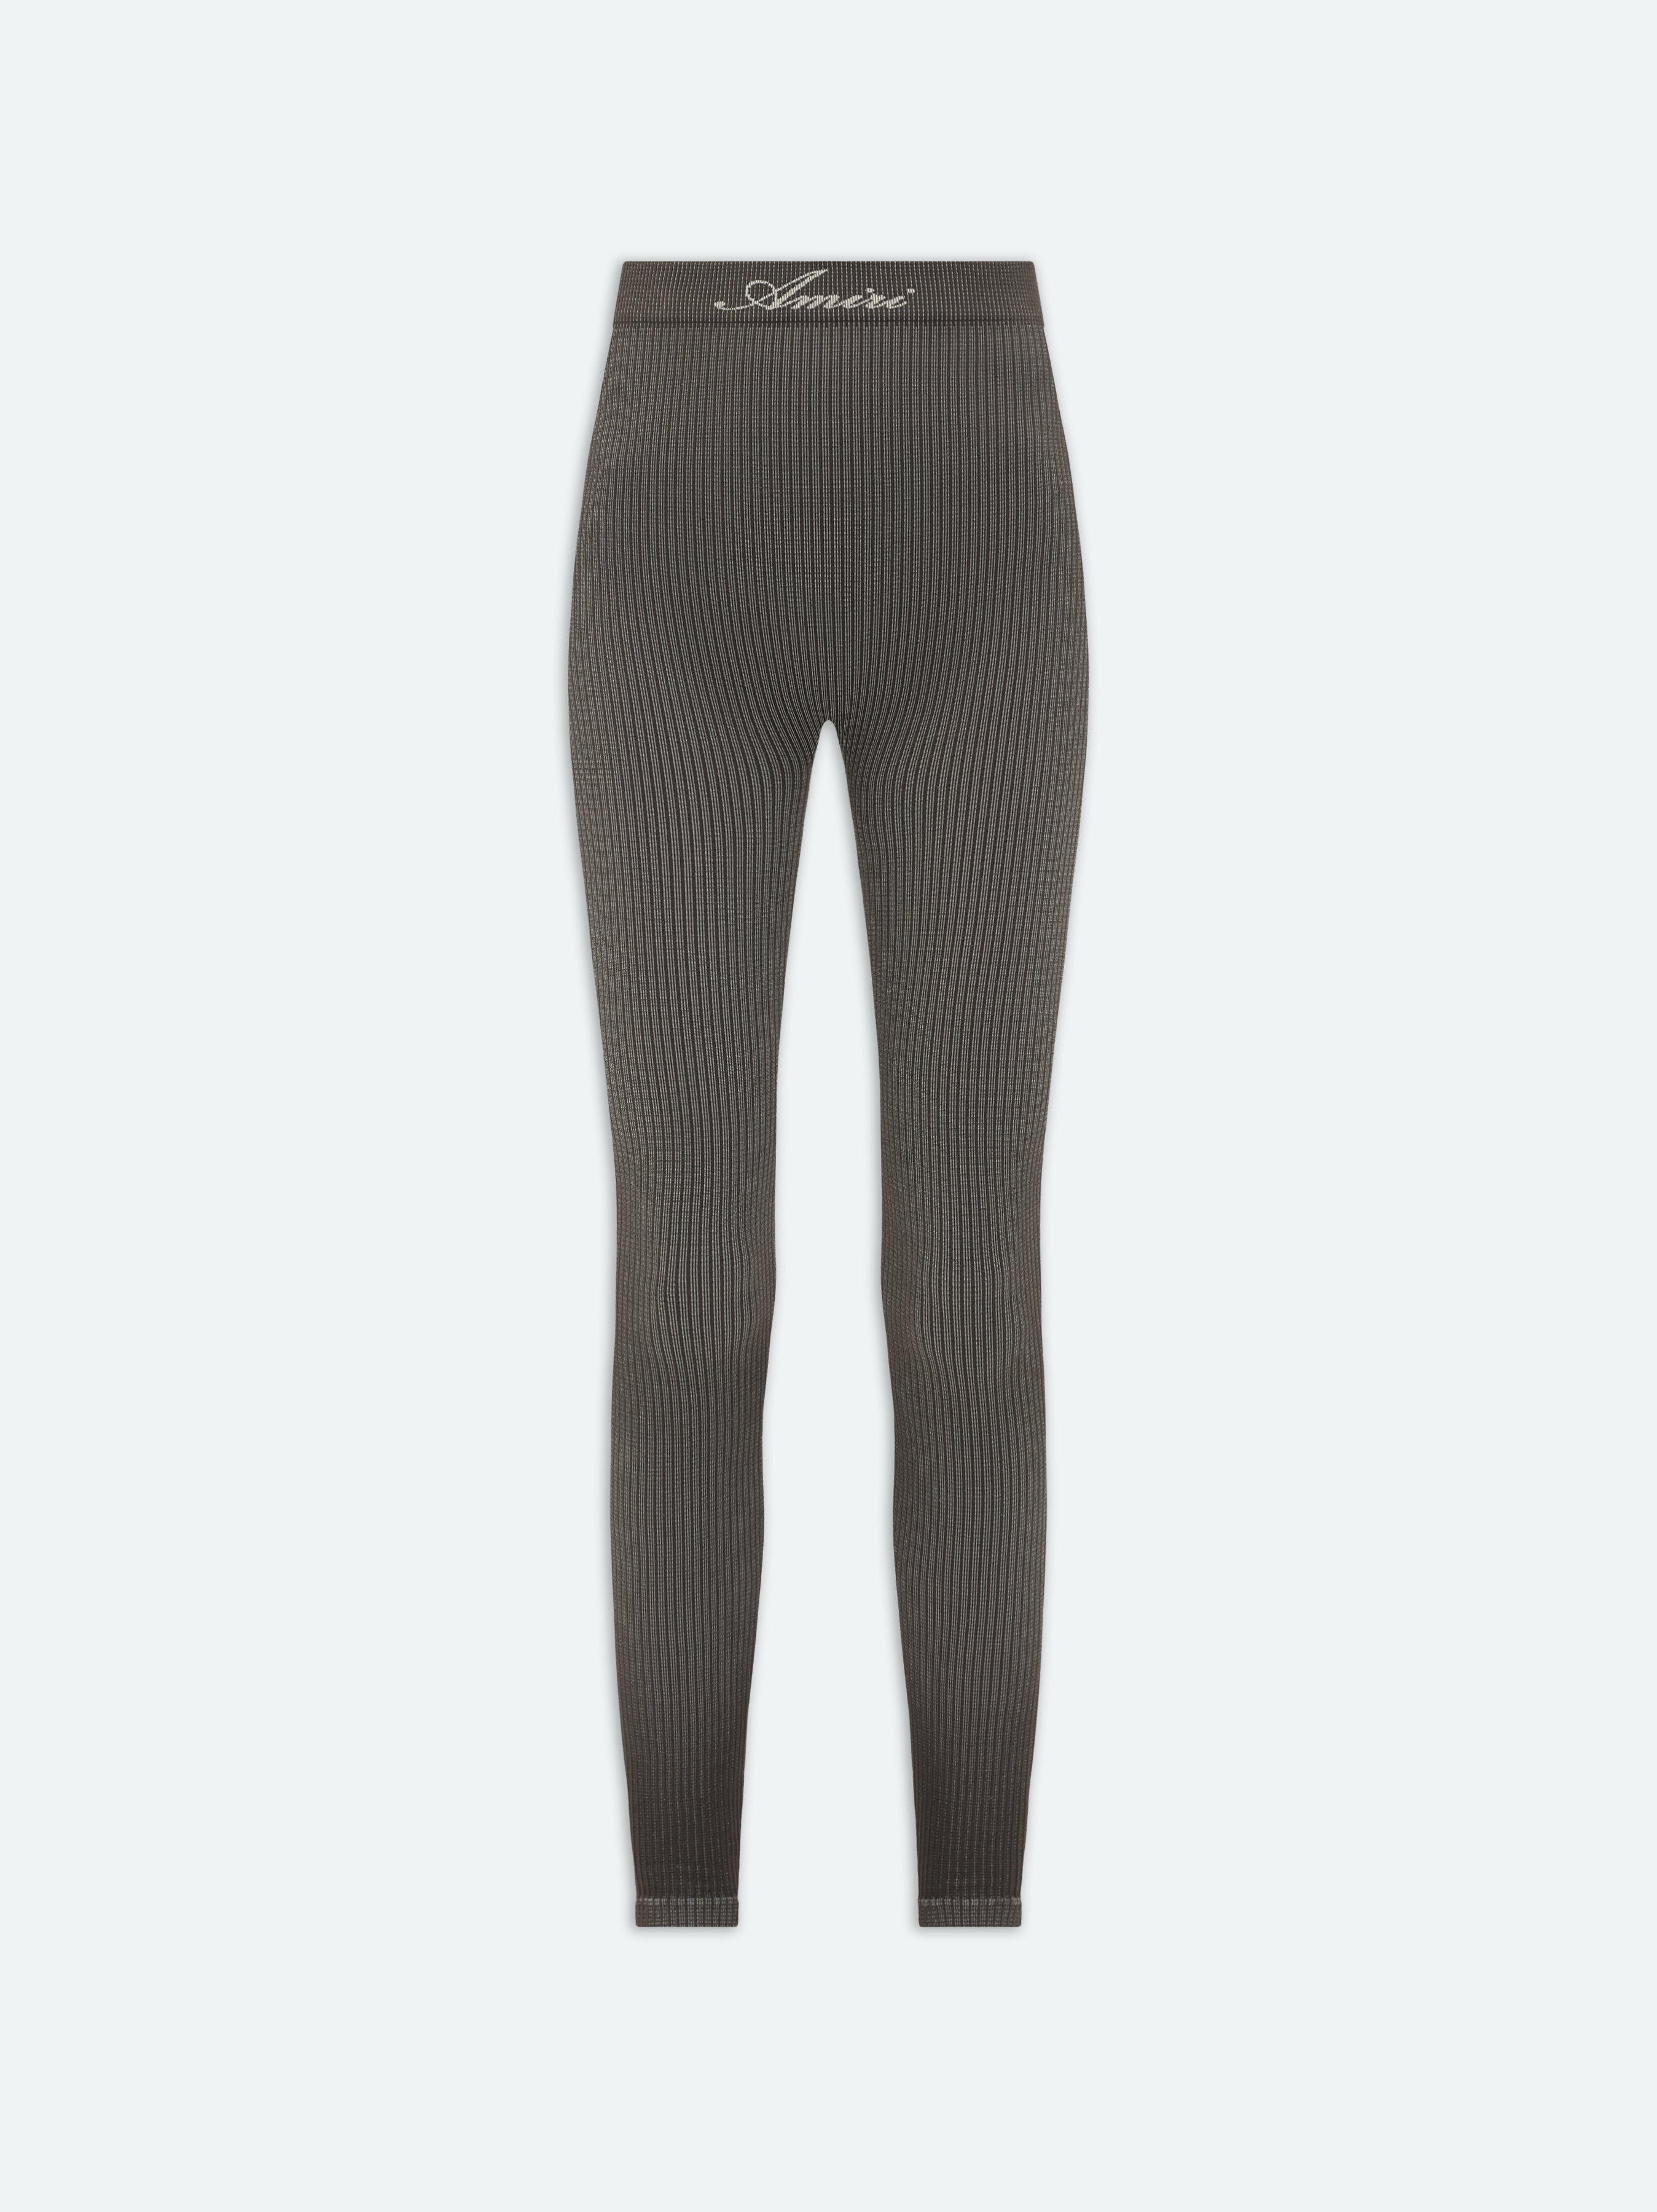 Product WOMEN - RIBBED SEAMLESS LEGGINGS - Brown featured image